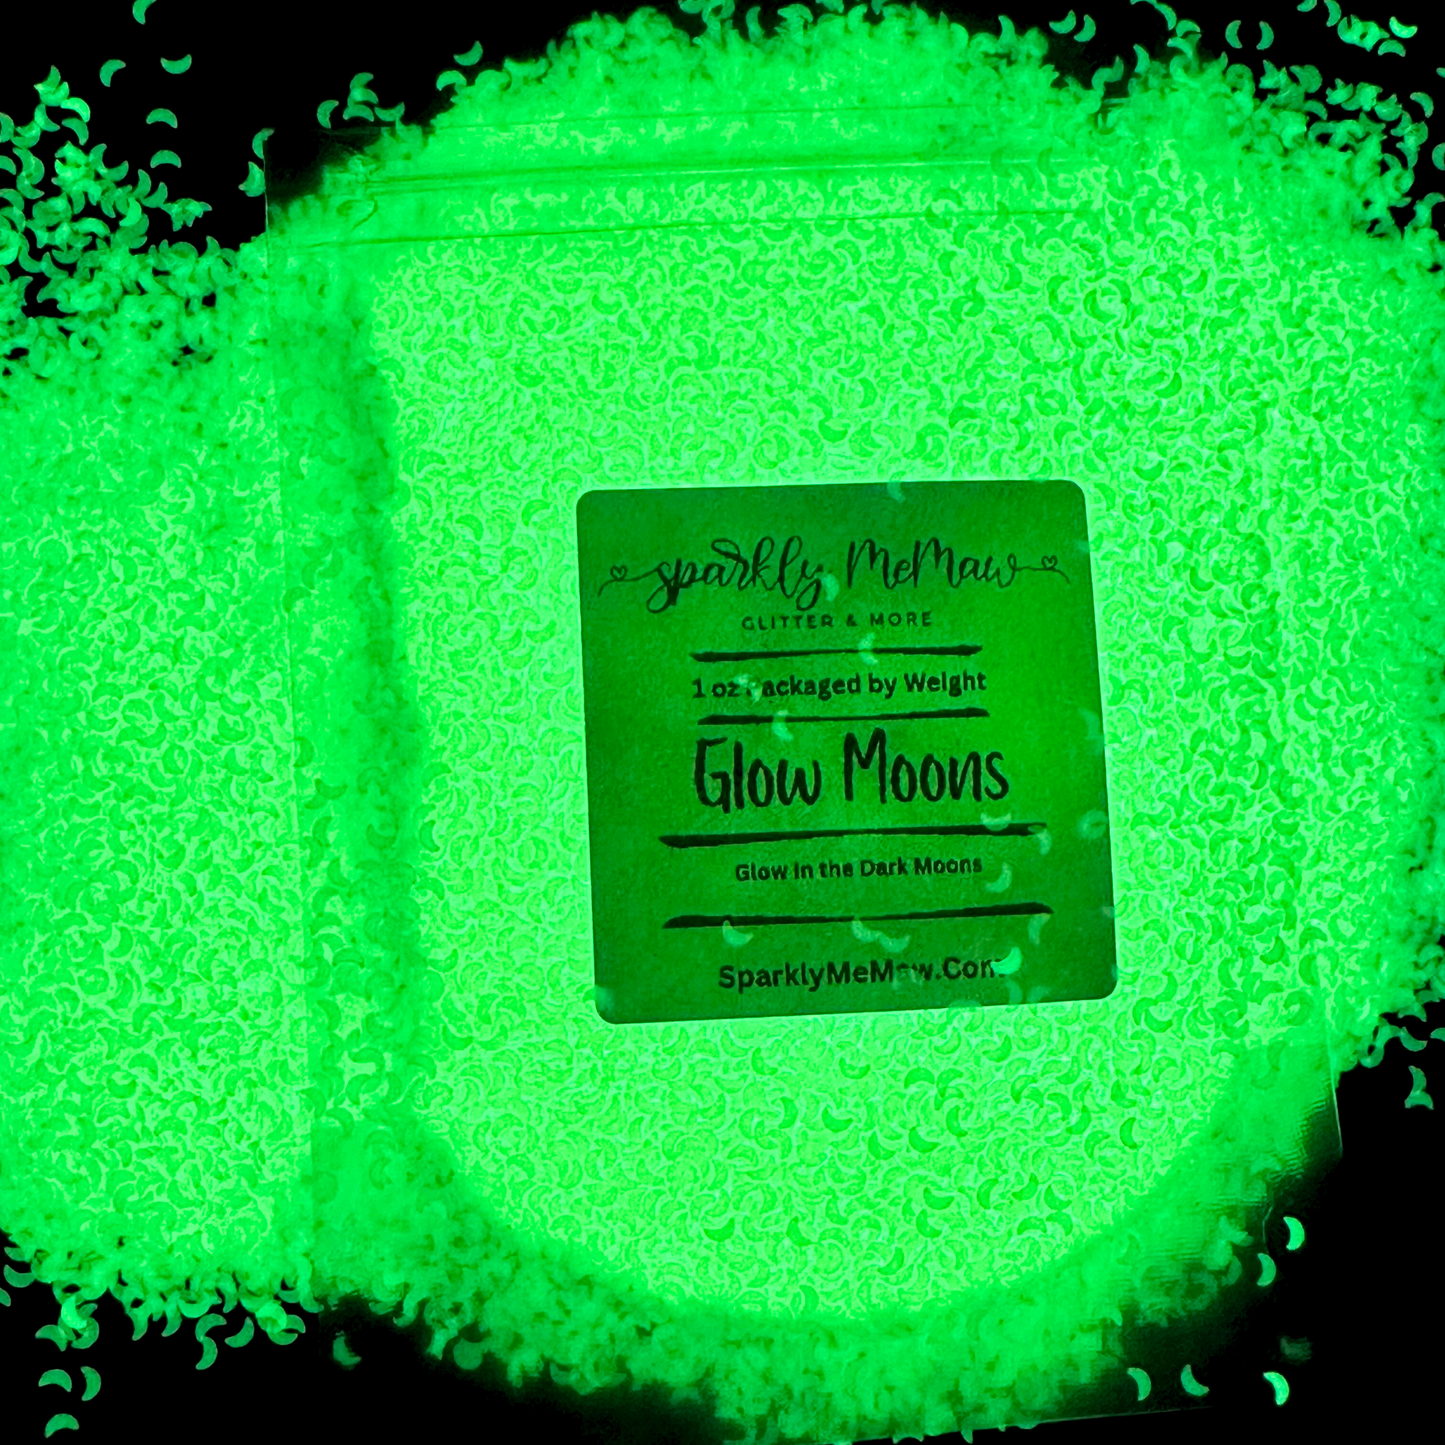 Glow Moons Glow in the Dark 3mm Moon Shapes